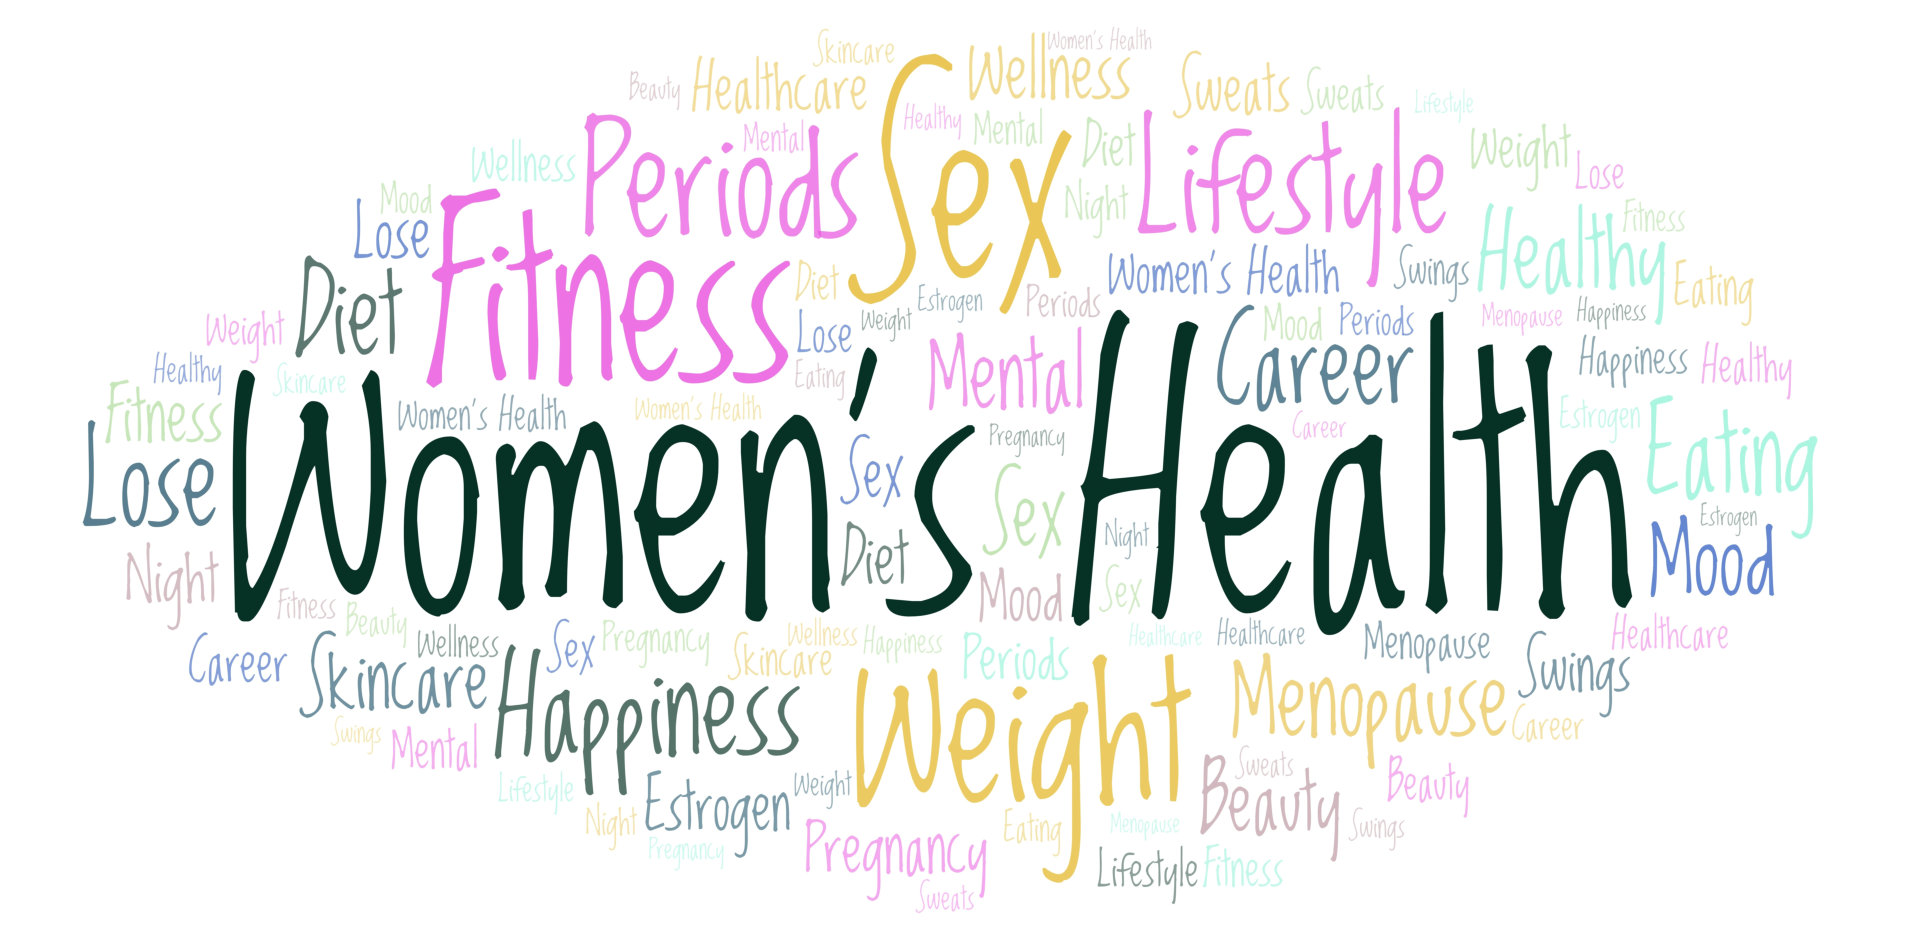 women's health, diet, fitness, periods, sex, lifestyle, weight, happiness, menopause